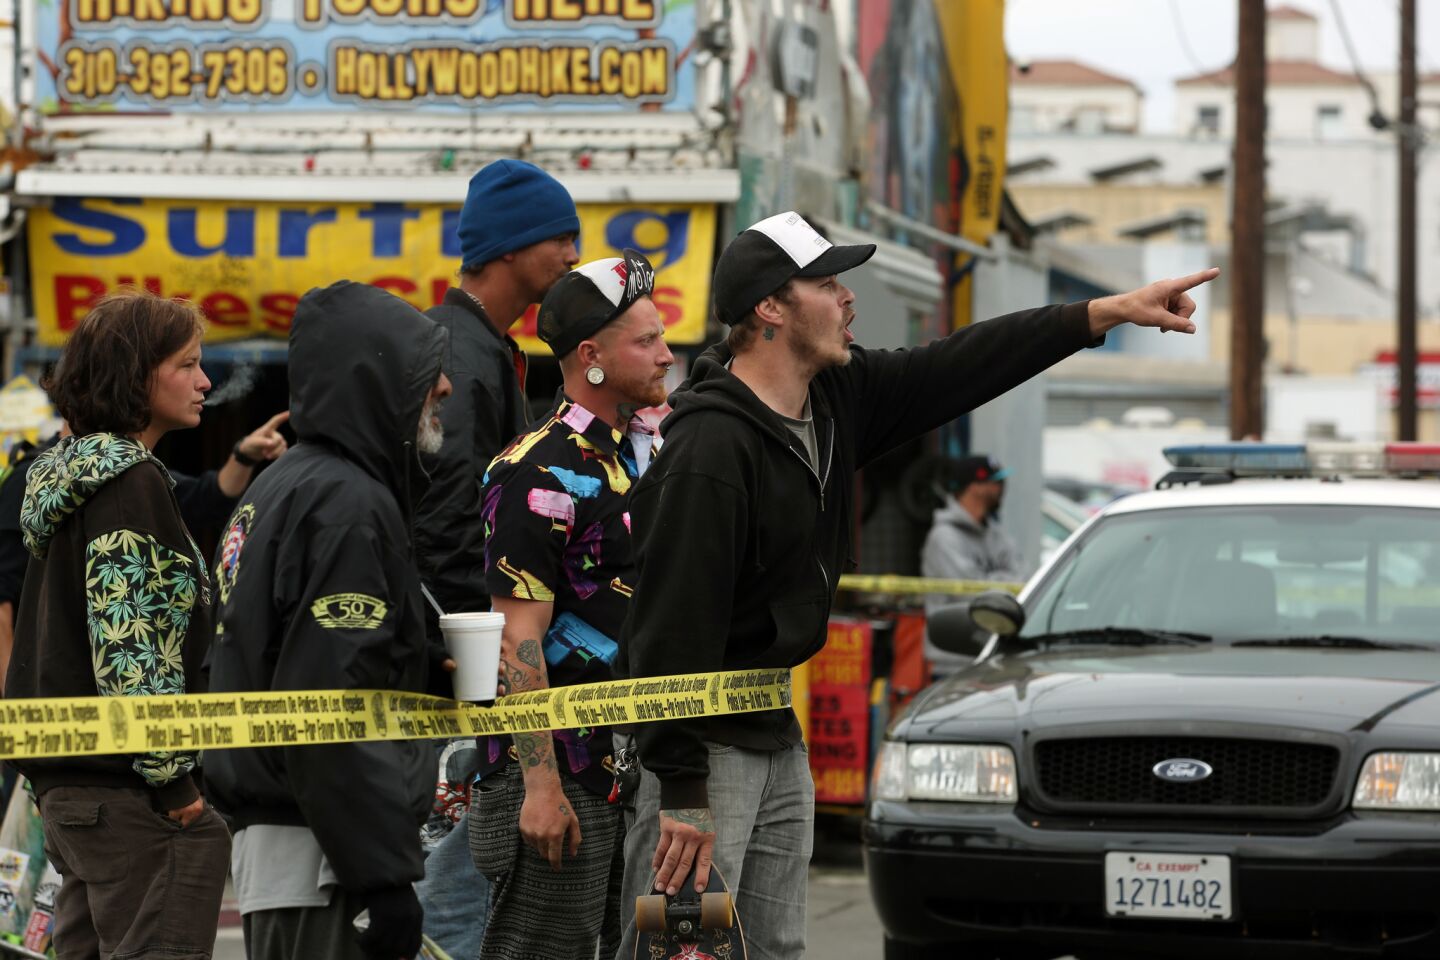 Protesters shout at police officers near the scene of the officer-involved shooting in Venice.